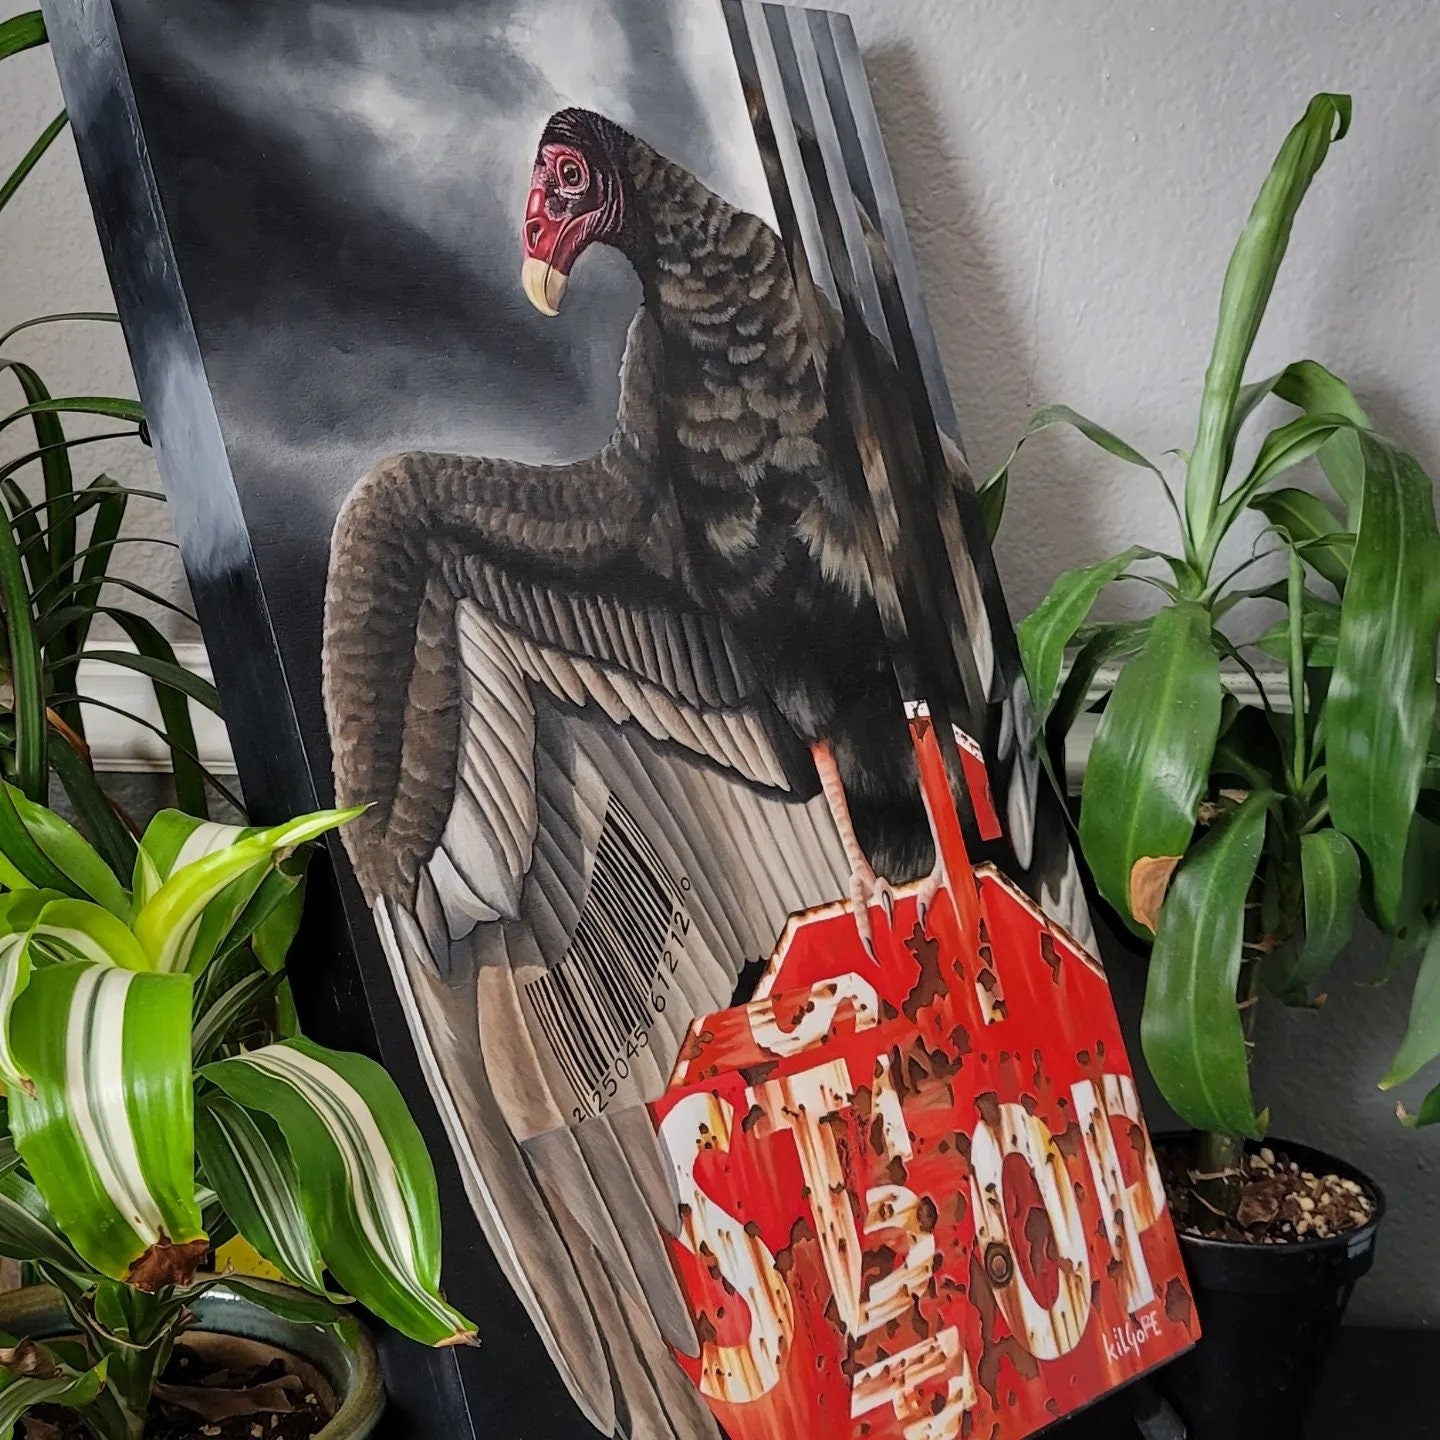 Turkey Vulture on a Stop Sign - Original Oil Painting "By Default" - By Kilgore, Original 15" x 24" x 2" Oil Painting on Cradled Wood